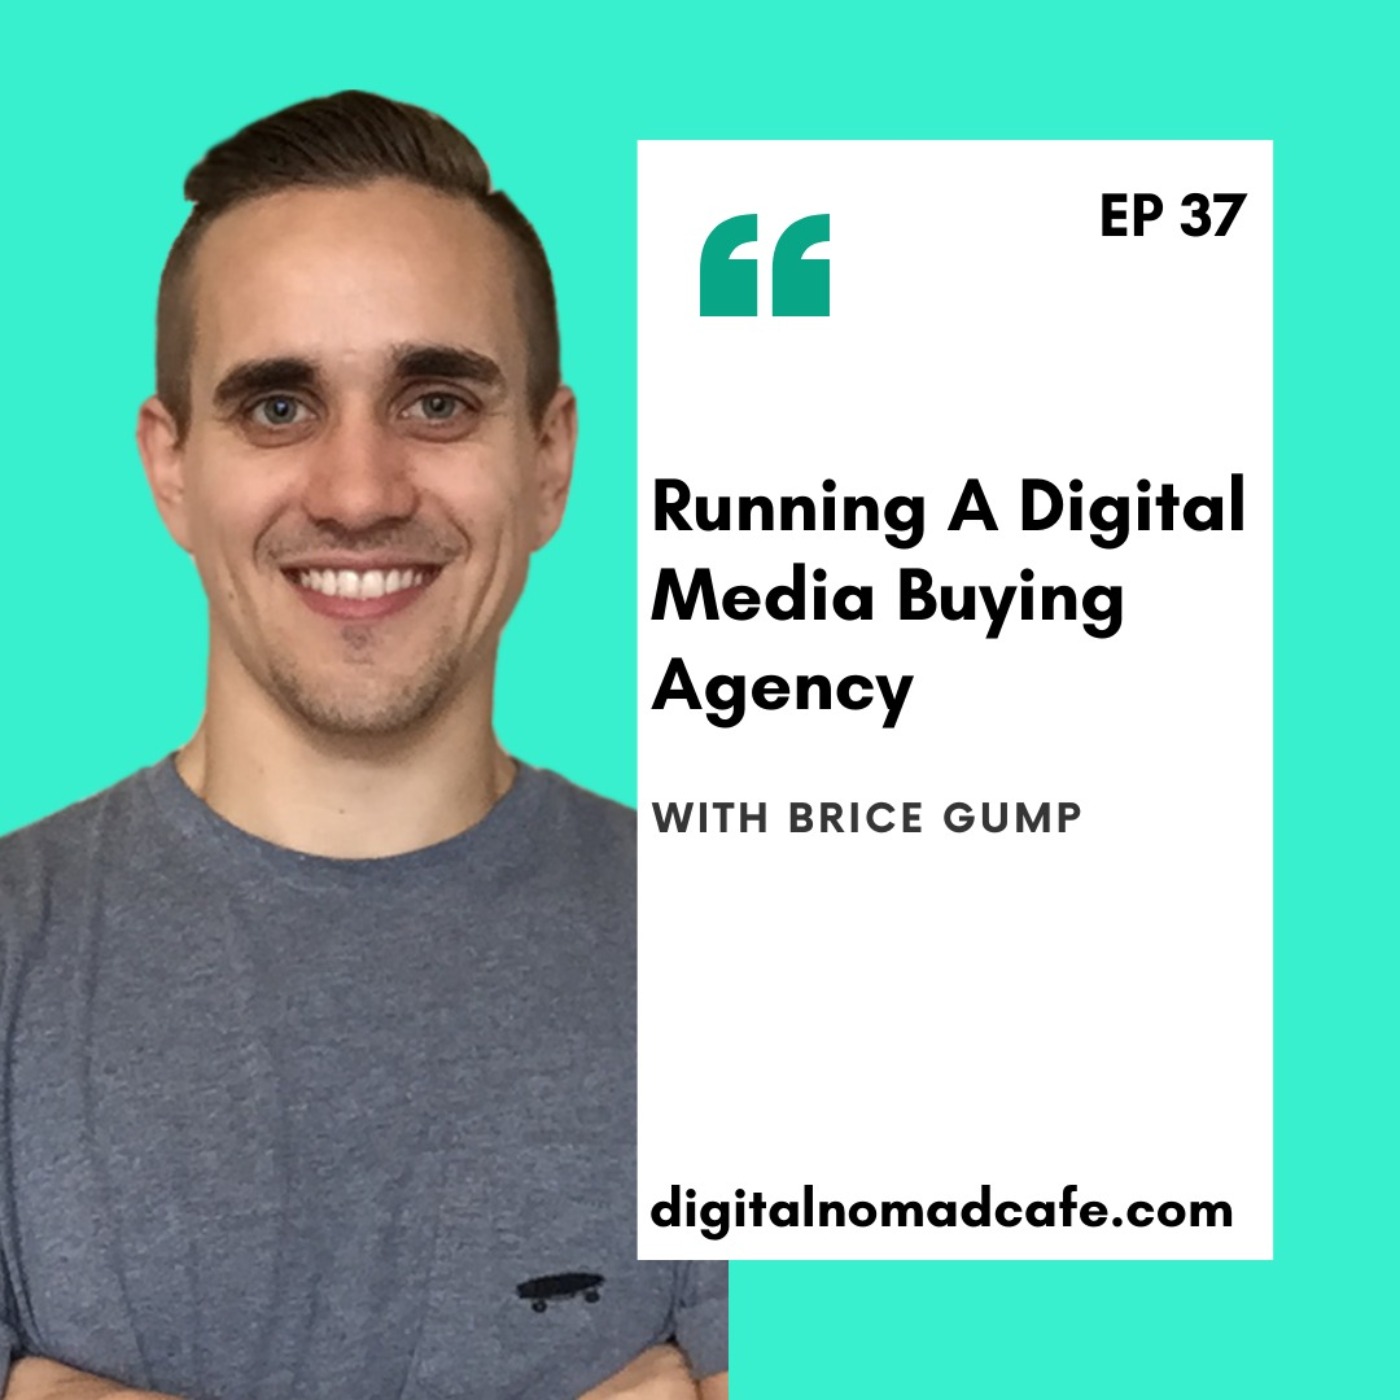 EP37: Running A Digital Media Buying Agency with Brice Gump